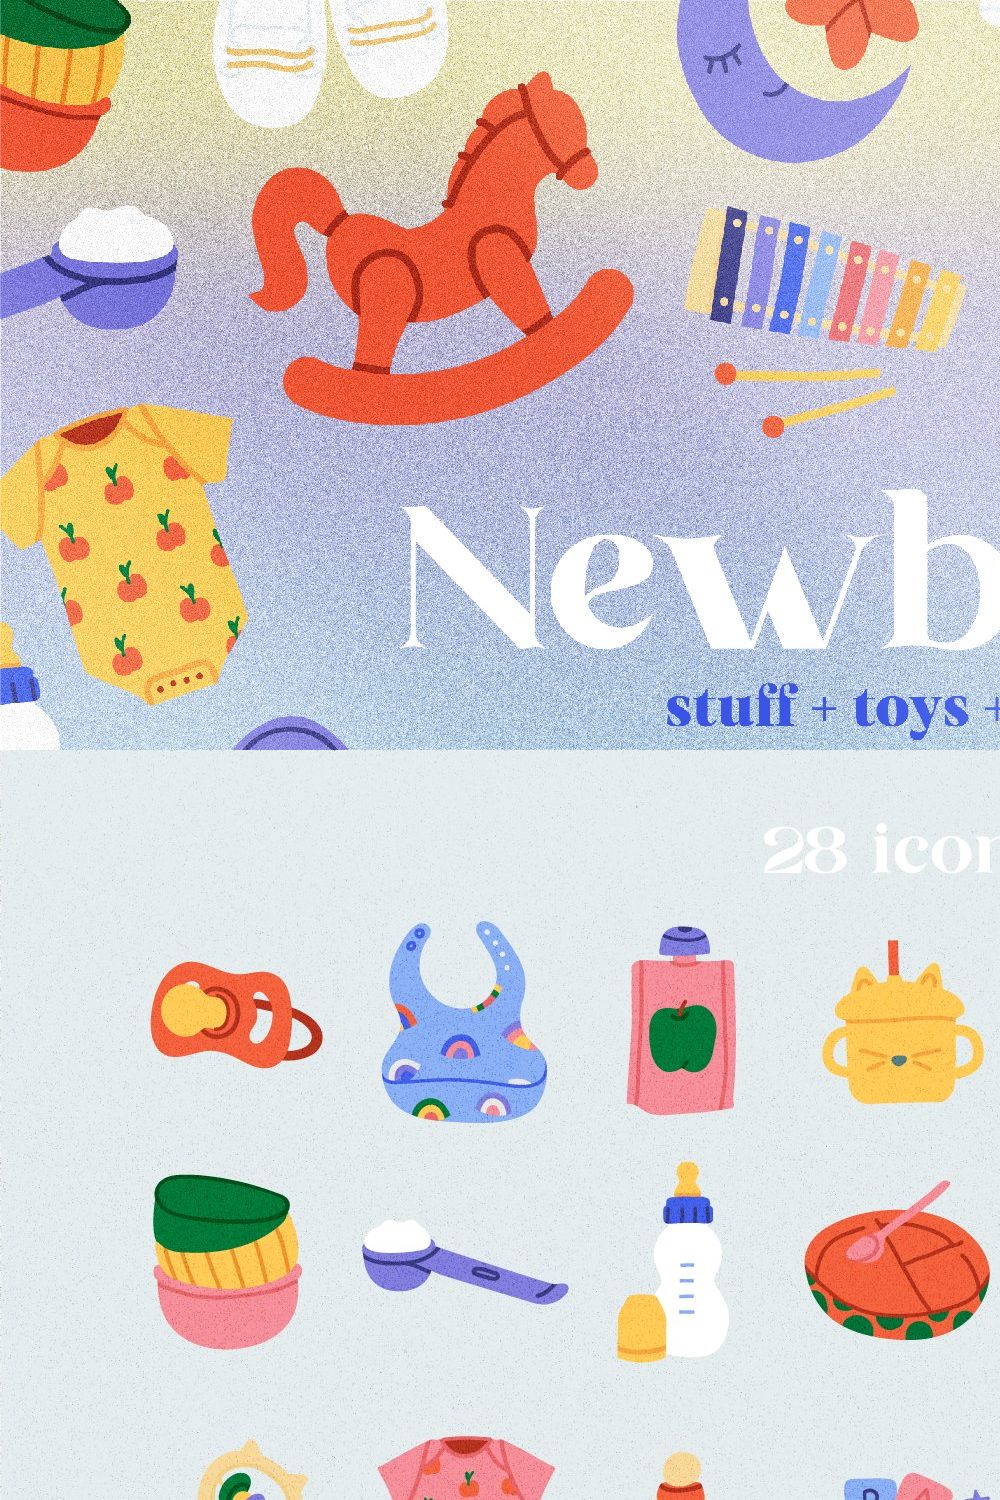 Newborn stuff. Baby toys, food icons pinterest preview image.